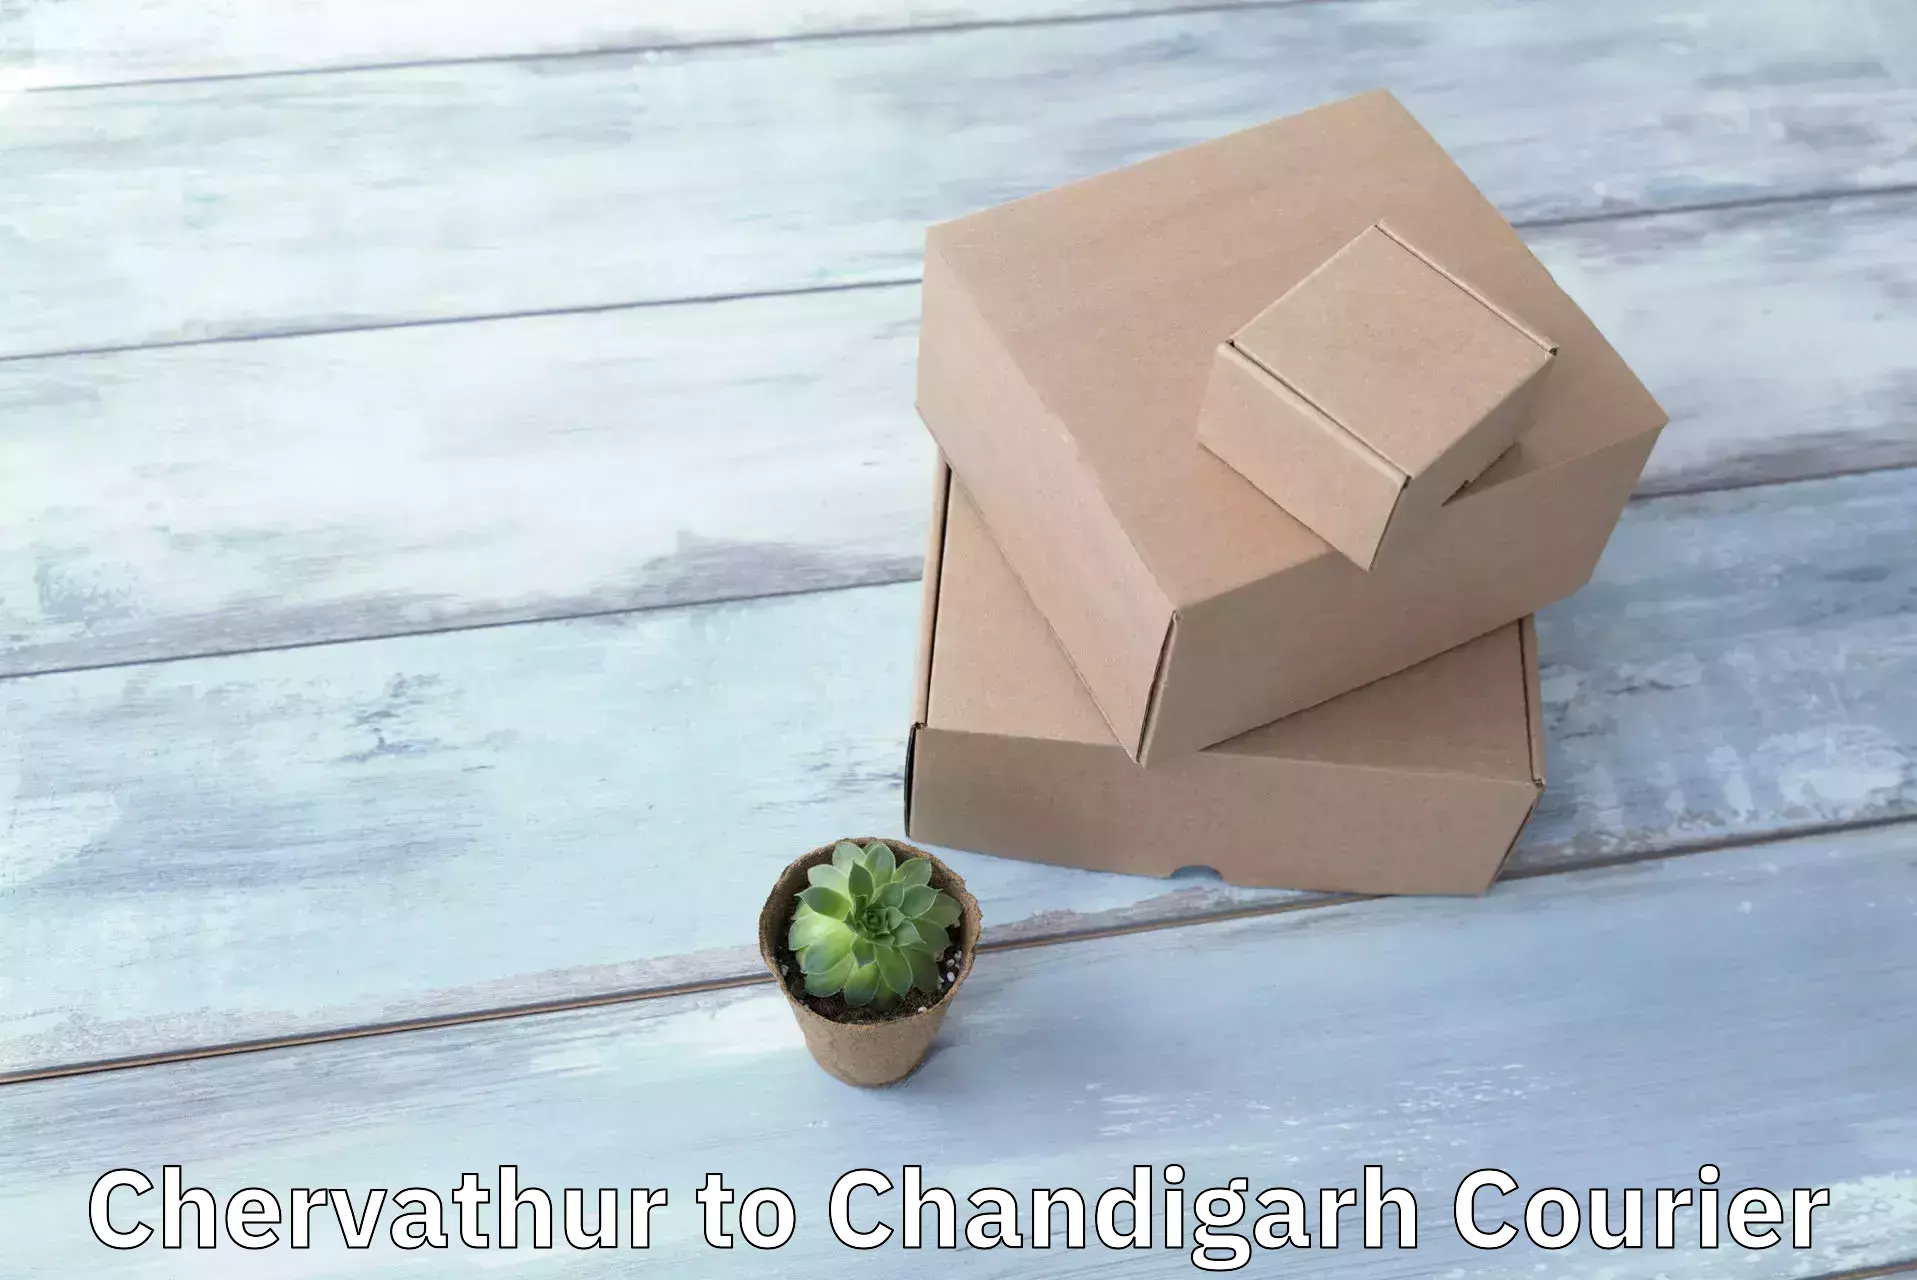 Professional courier services Chervathur to Chandigarh